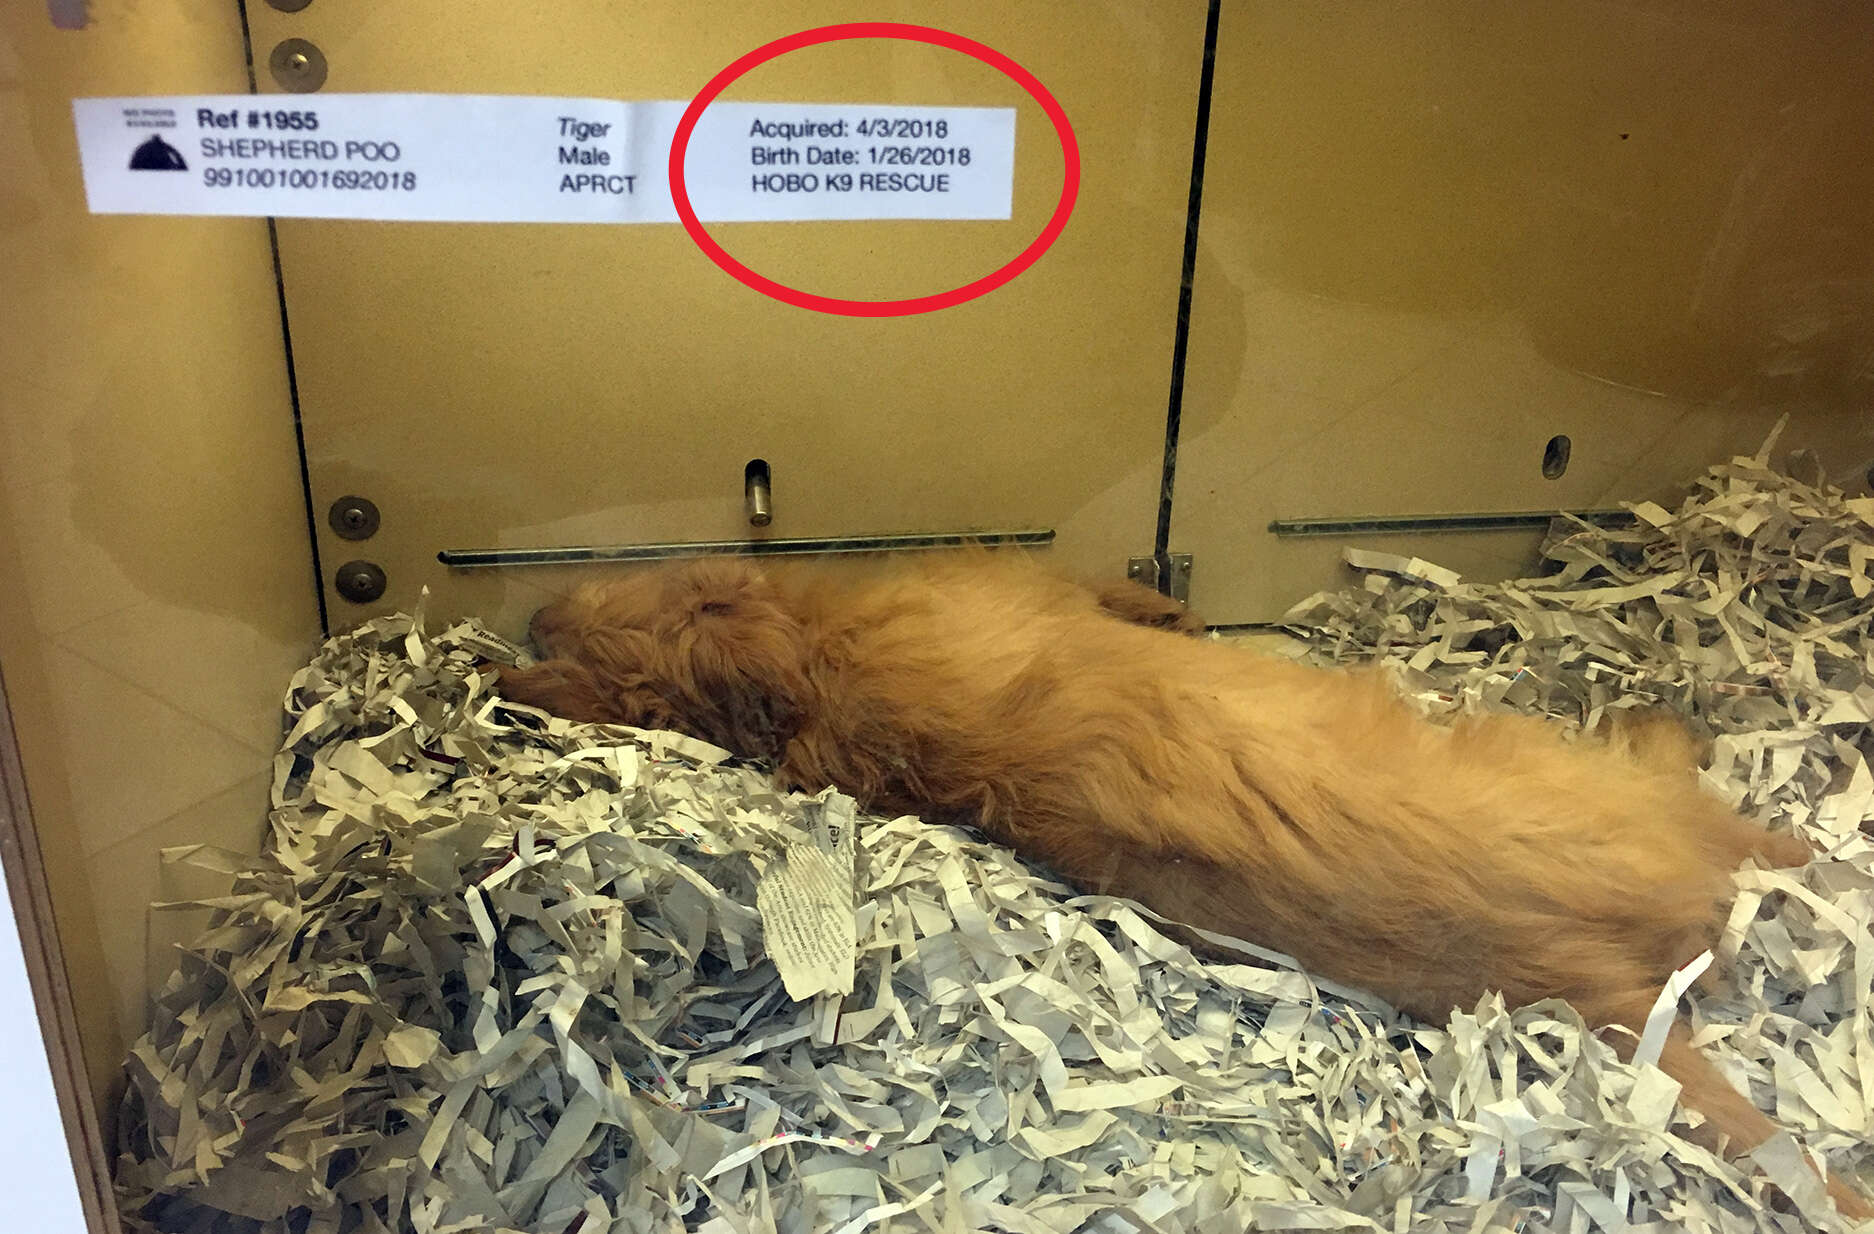 Dog being sold at pet store